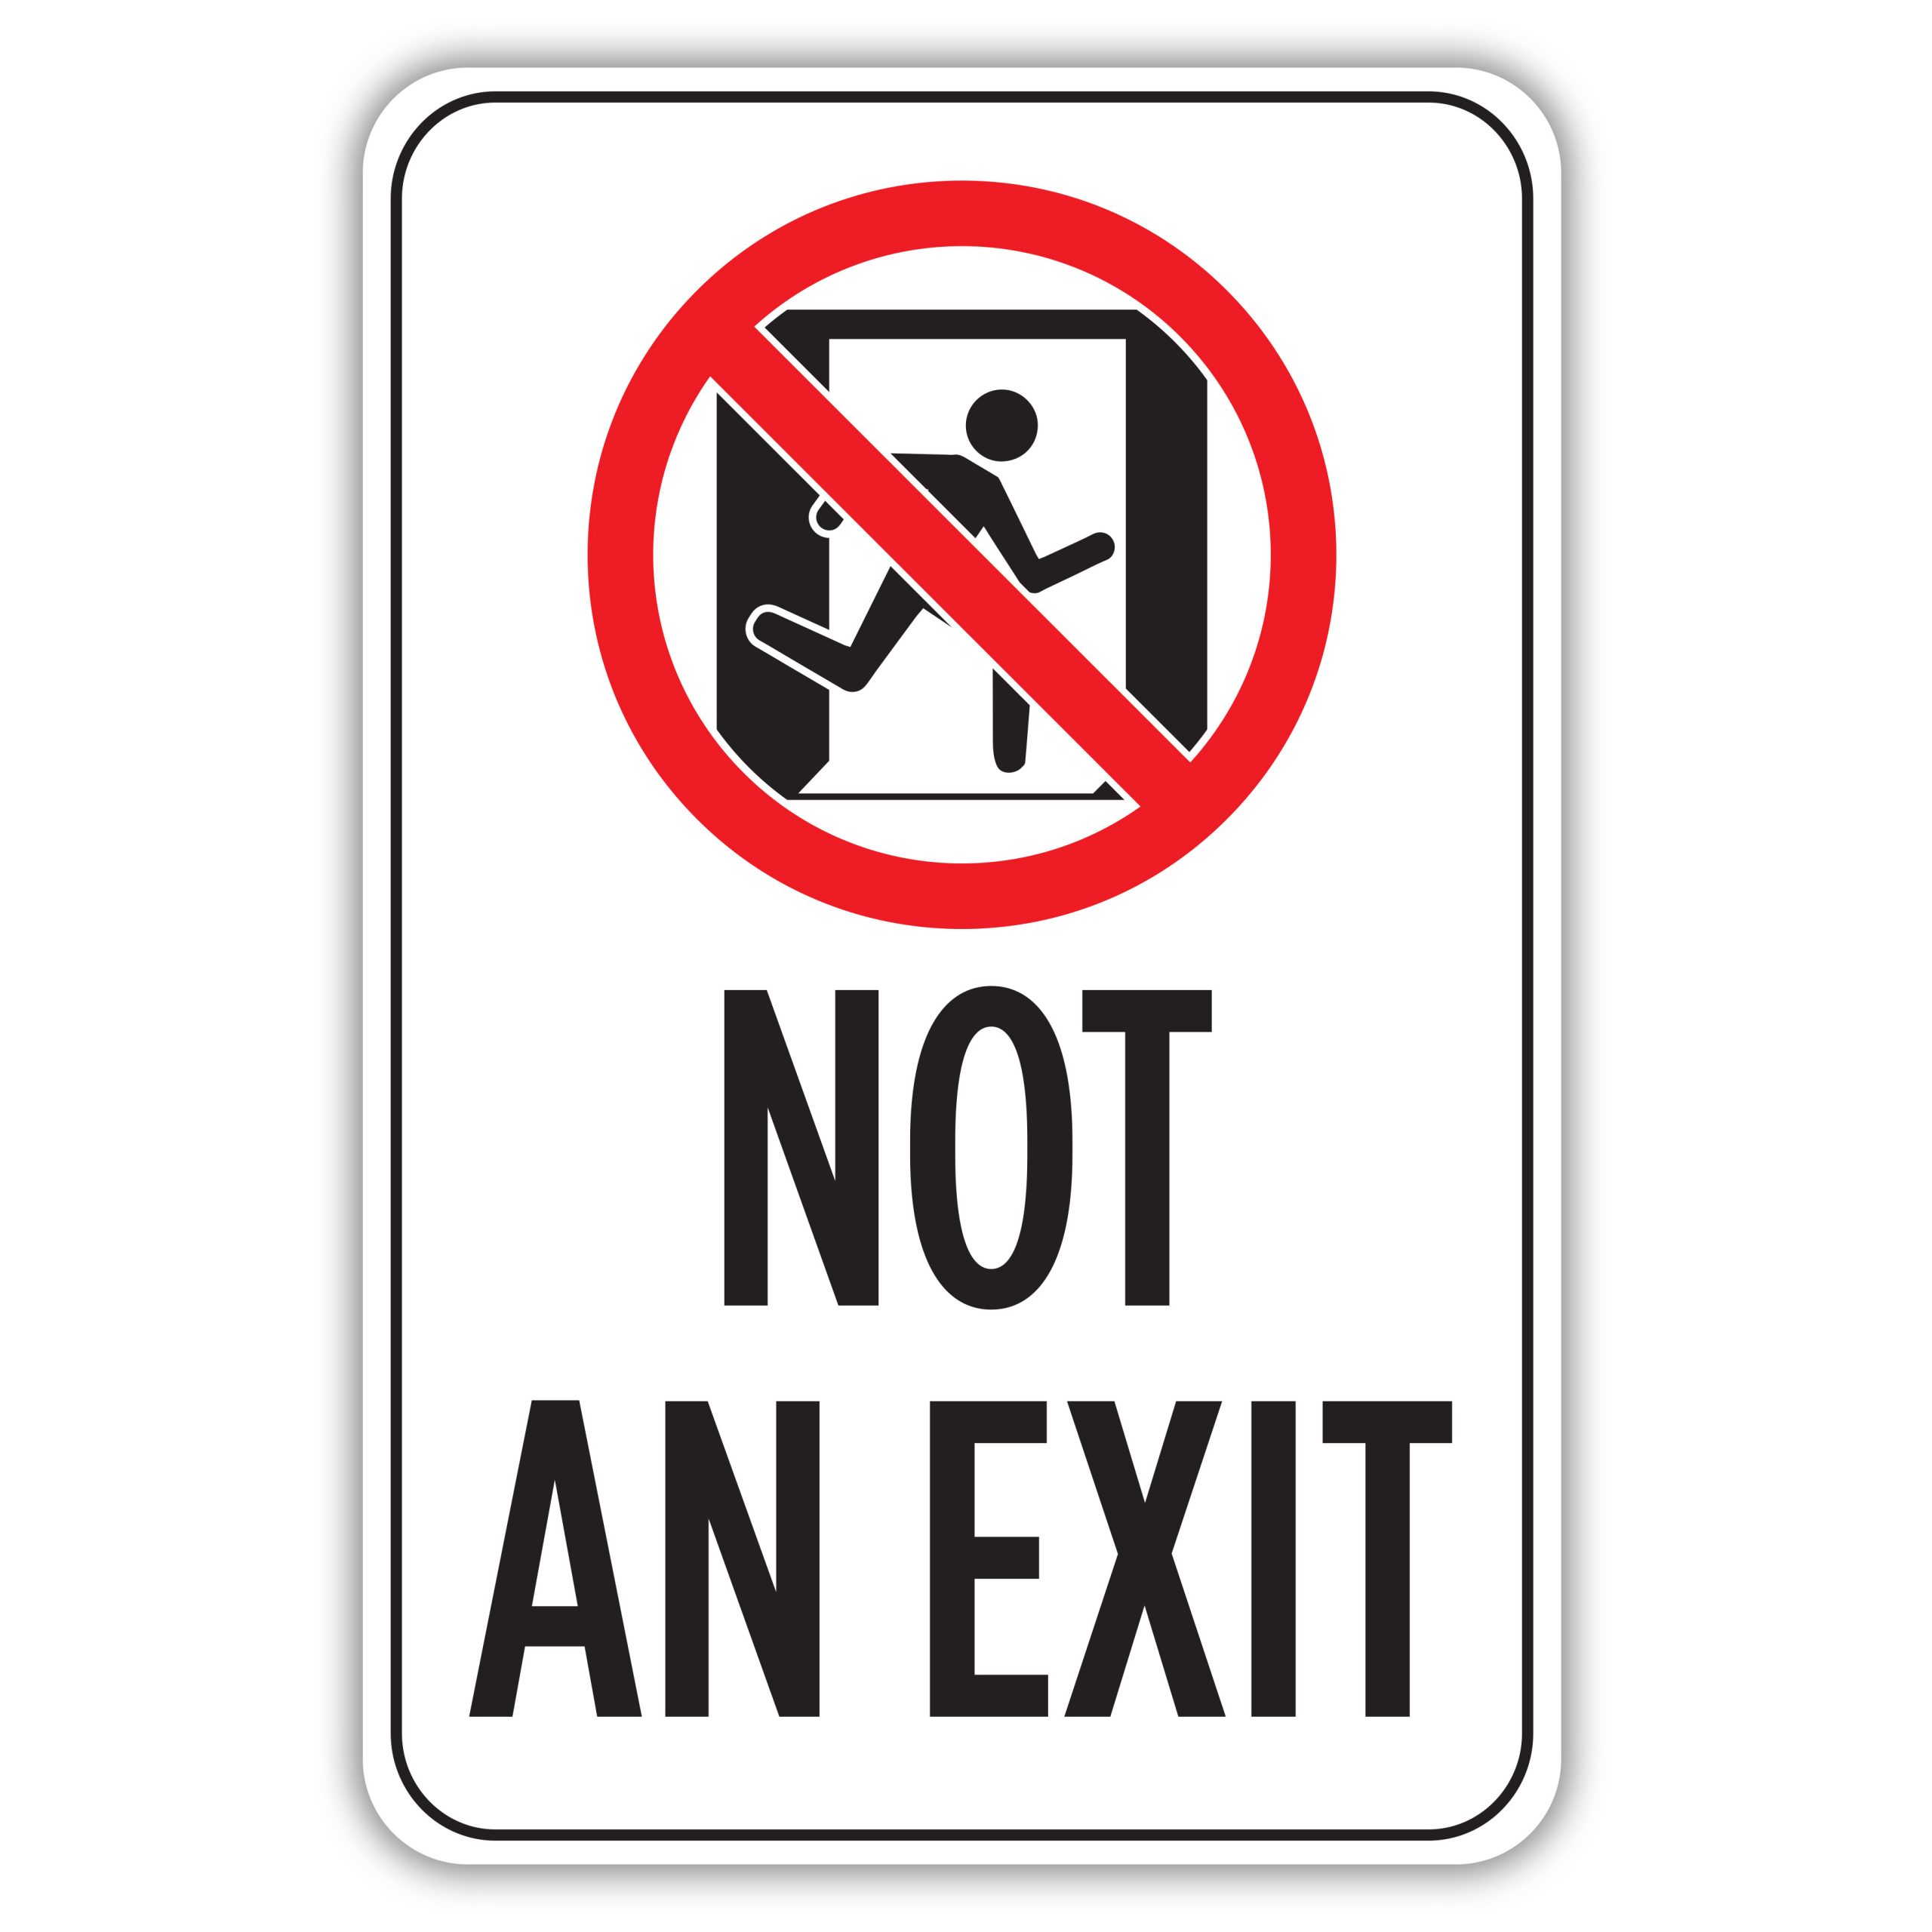 not-an-exit-american-sign-company